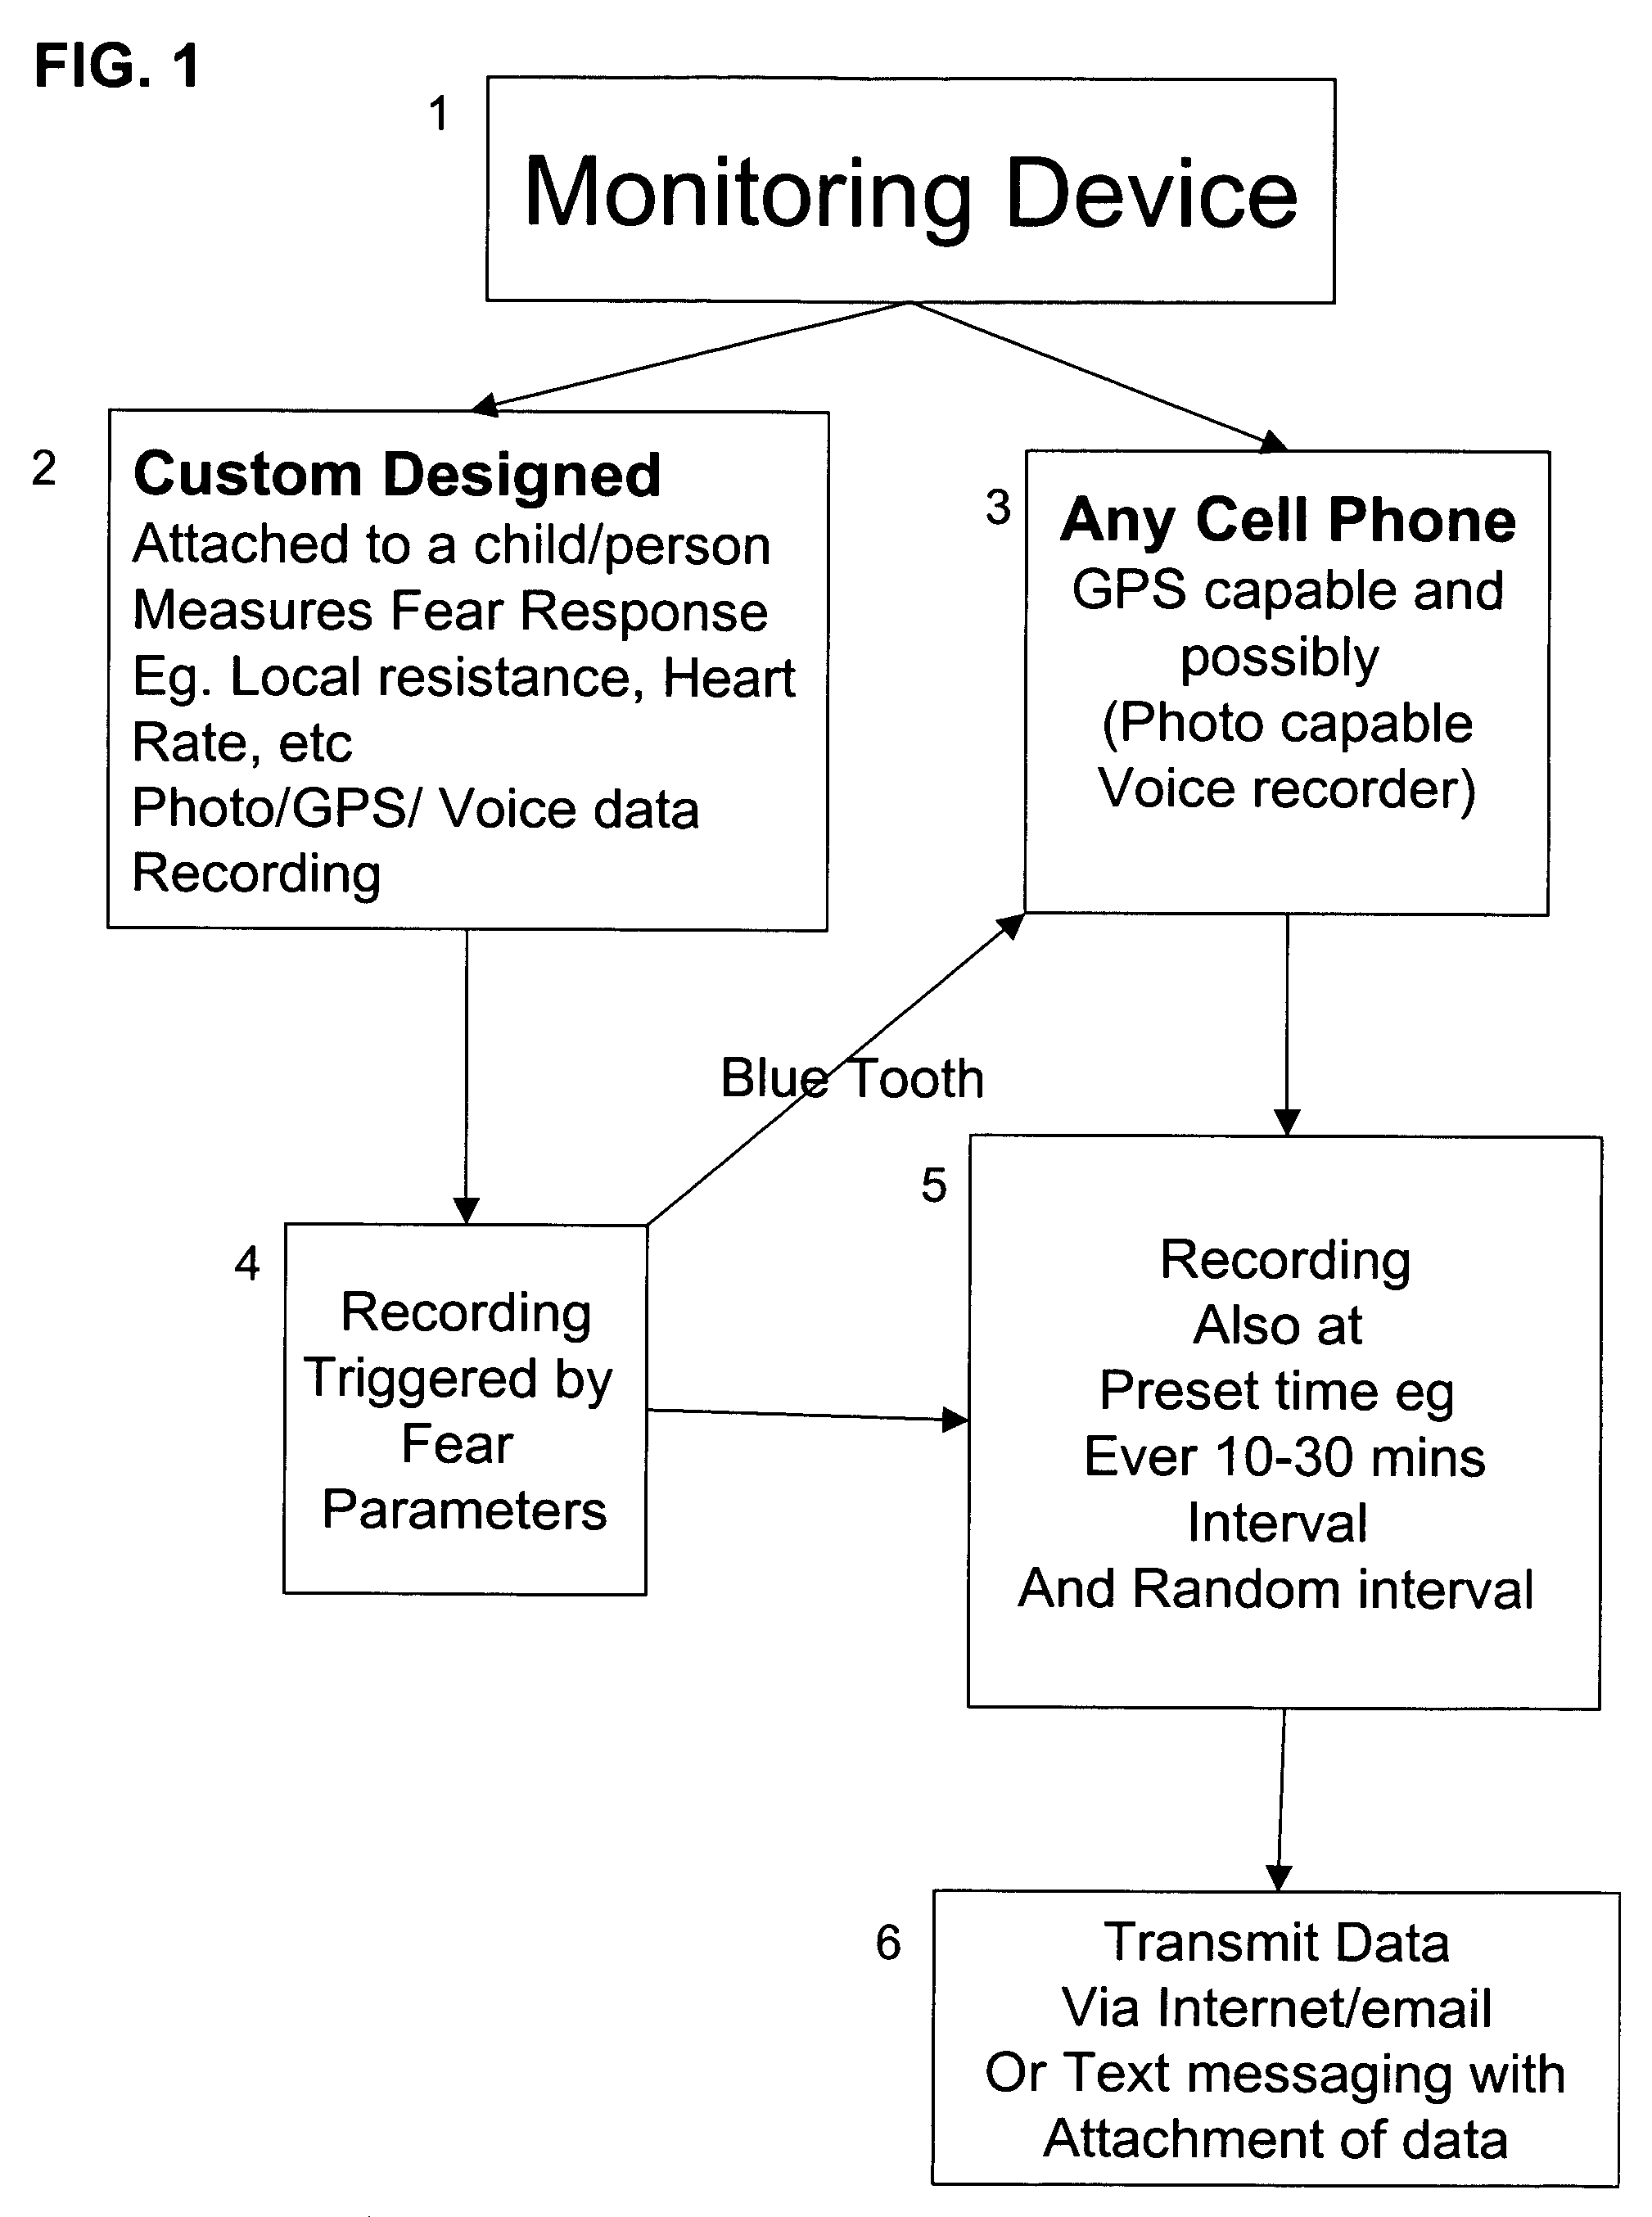 Systems and methods for remote monitoring of fear and distress responses